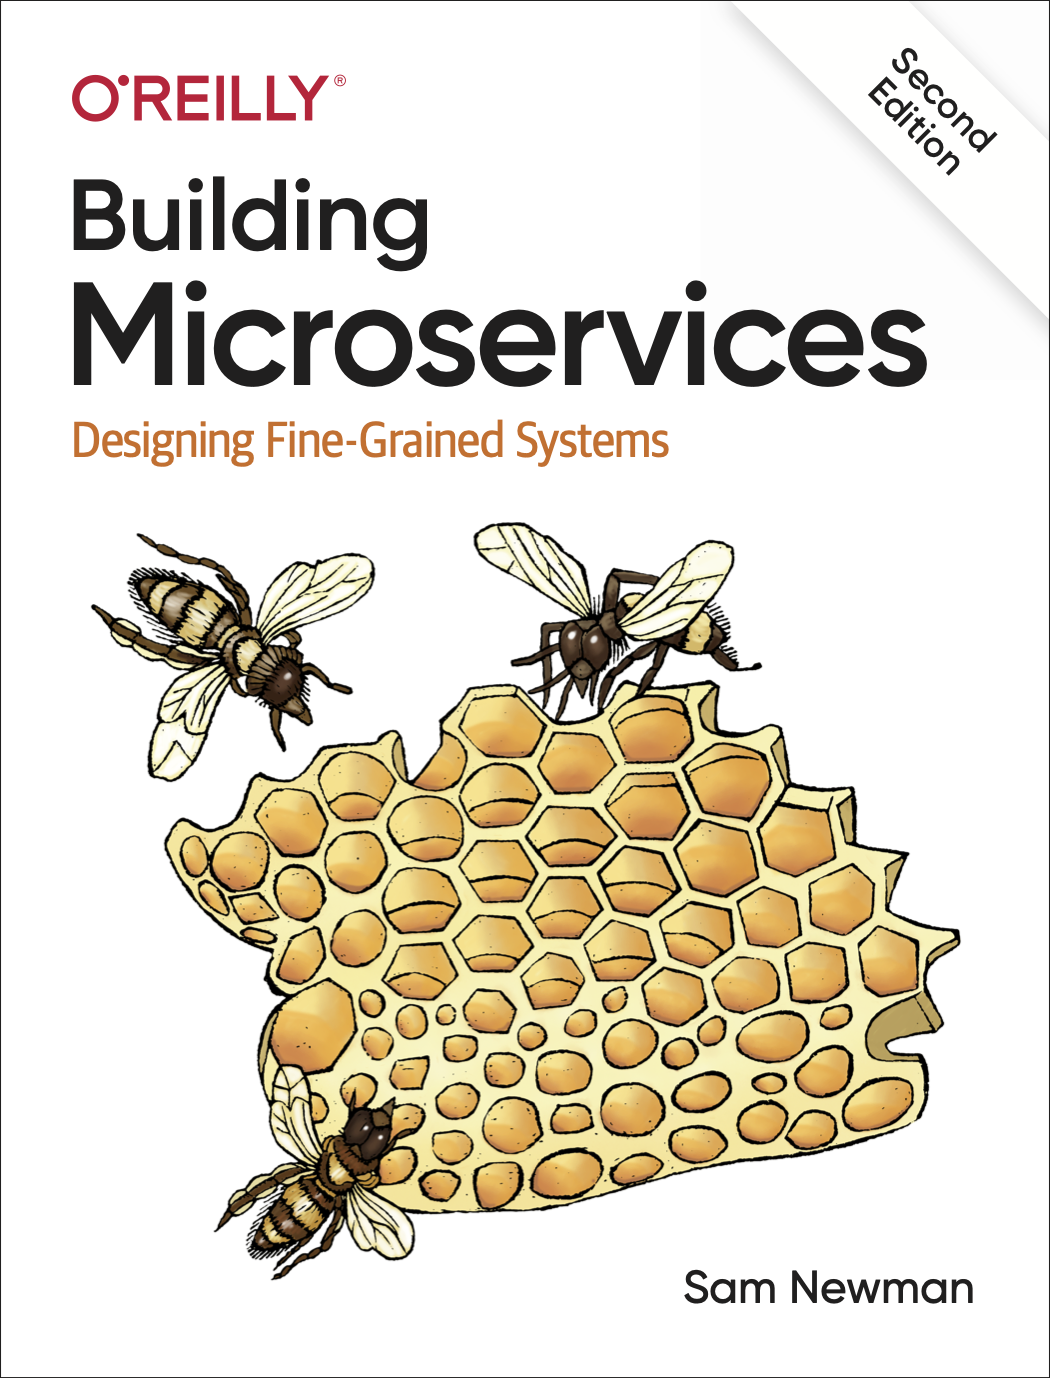 Building Microservices, 2nd edition, a new book by Sam Newman, published by O'Reilly